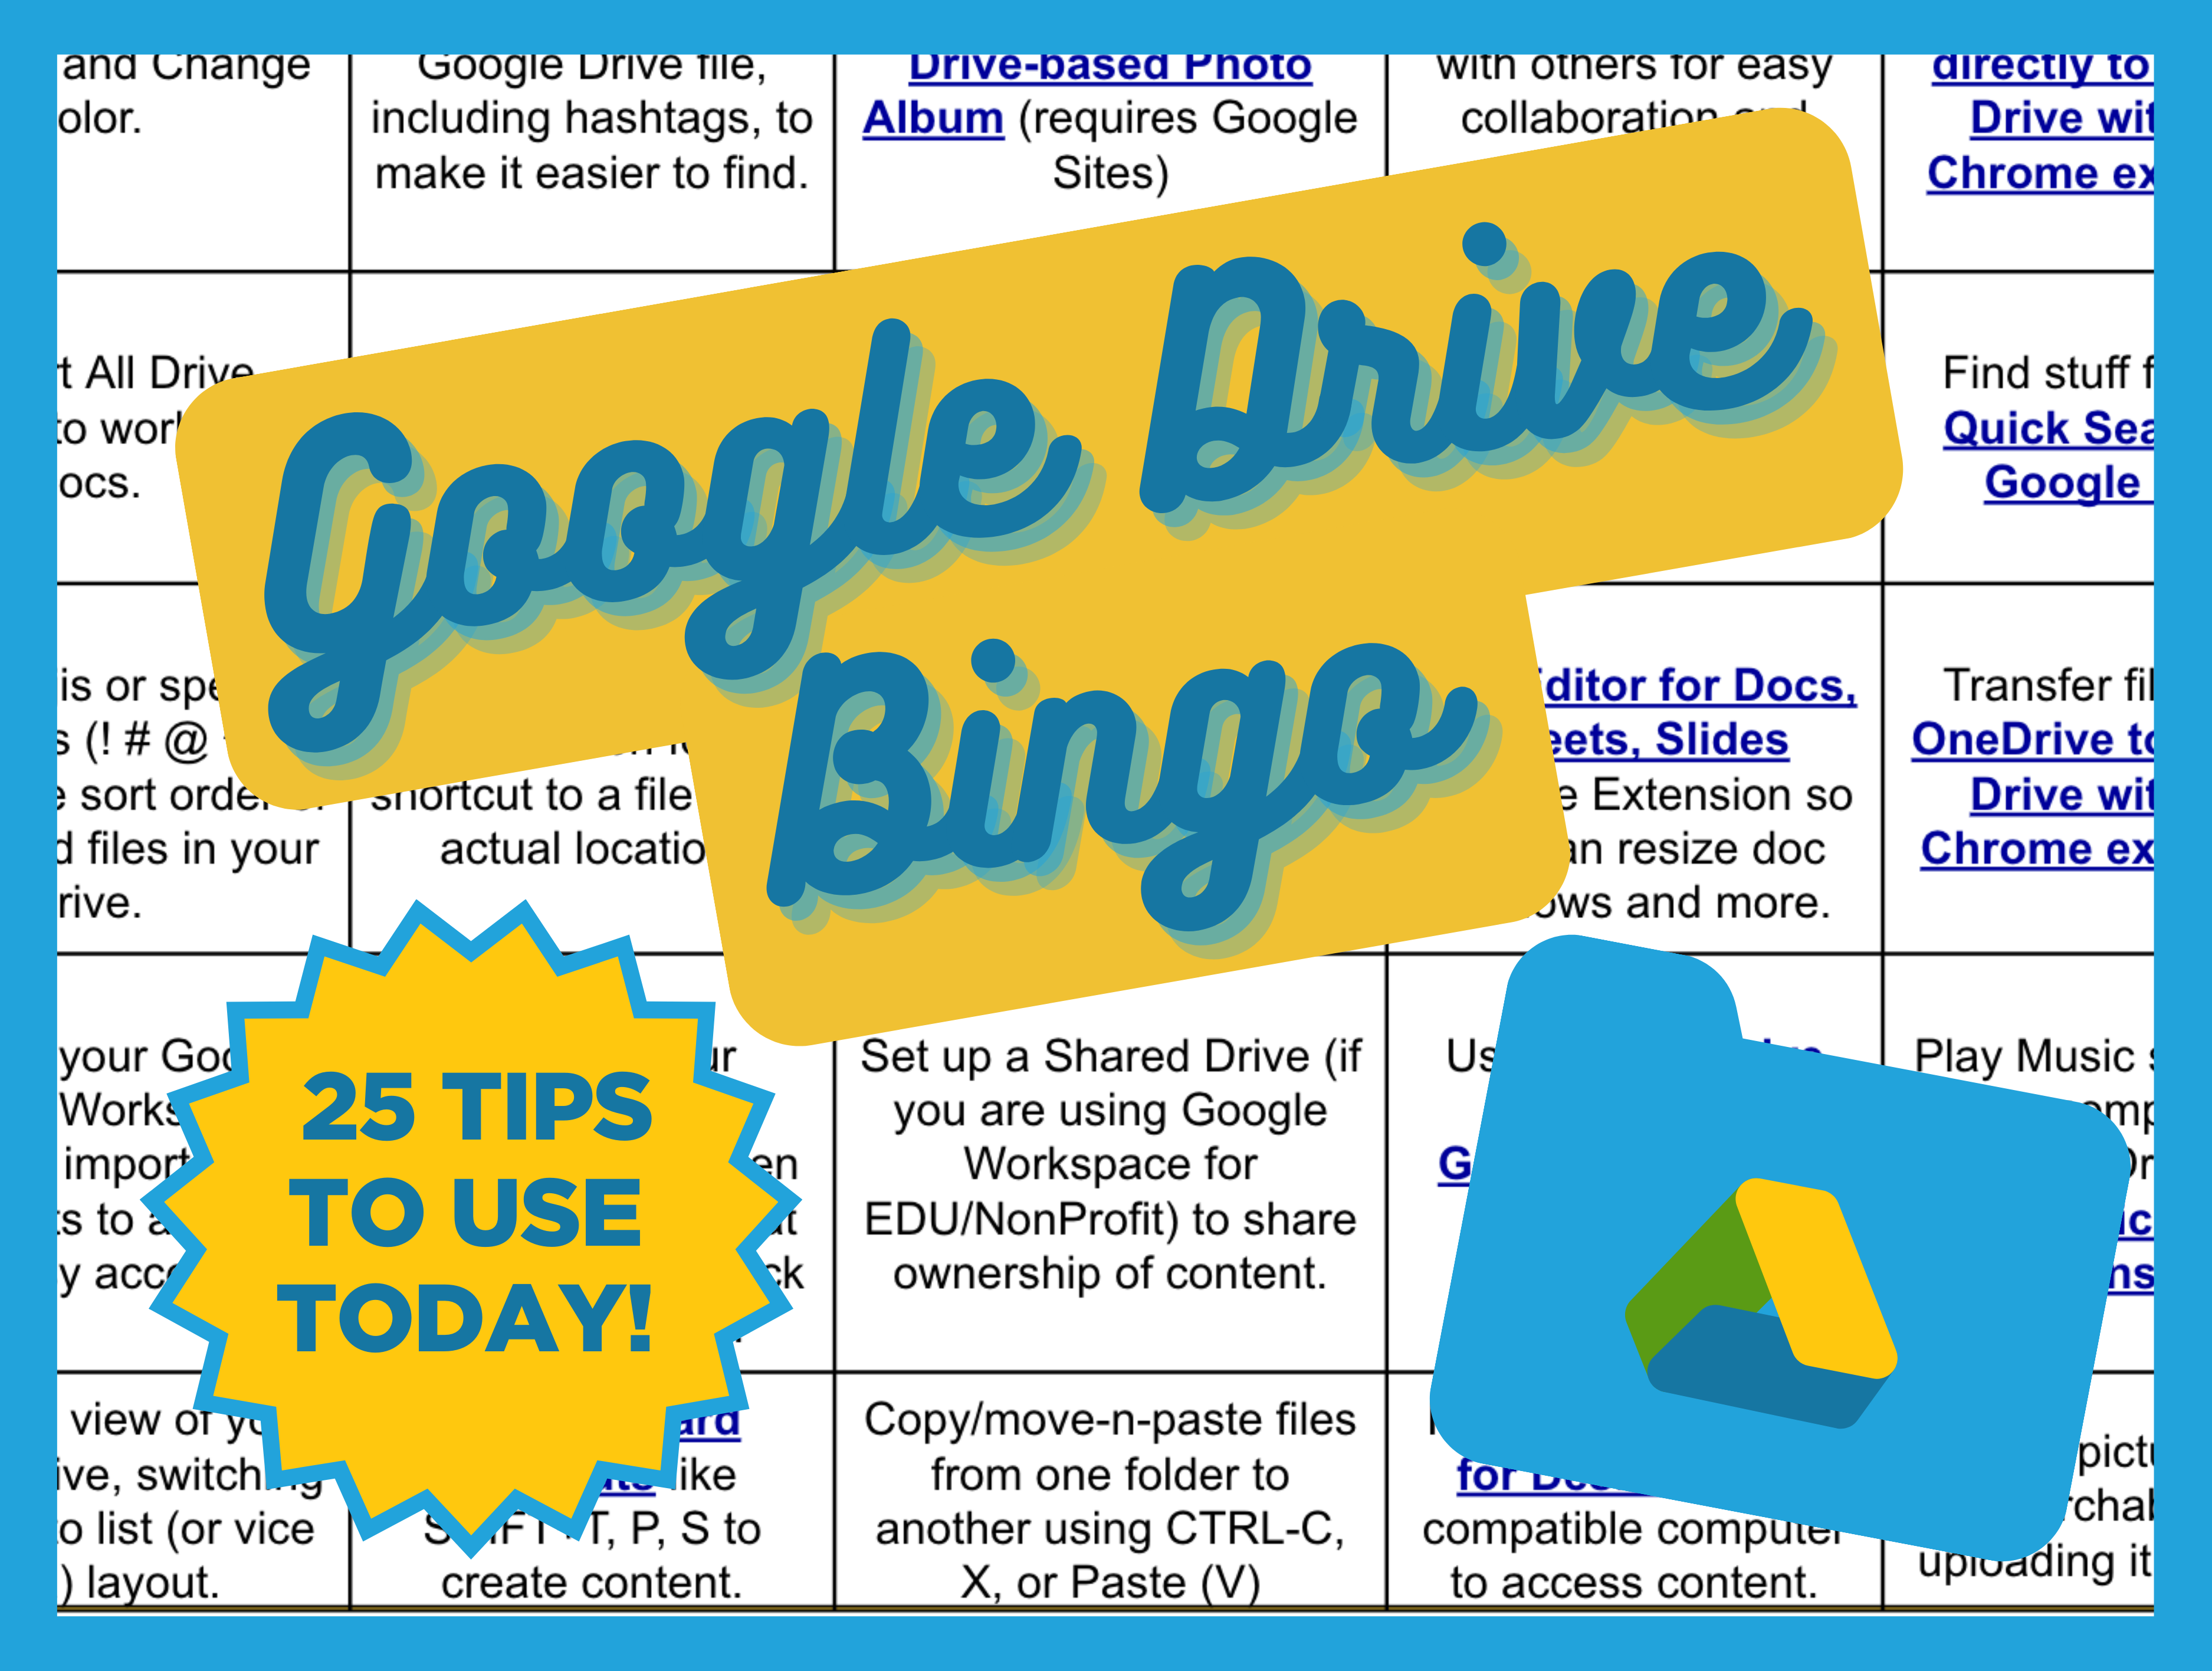 Want to Keep a Secret? How to Encrypt a Document Stored on Google Drive